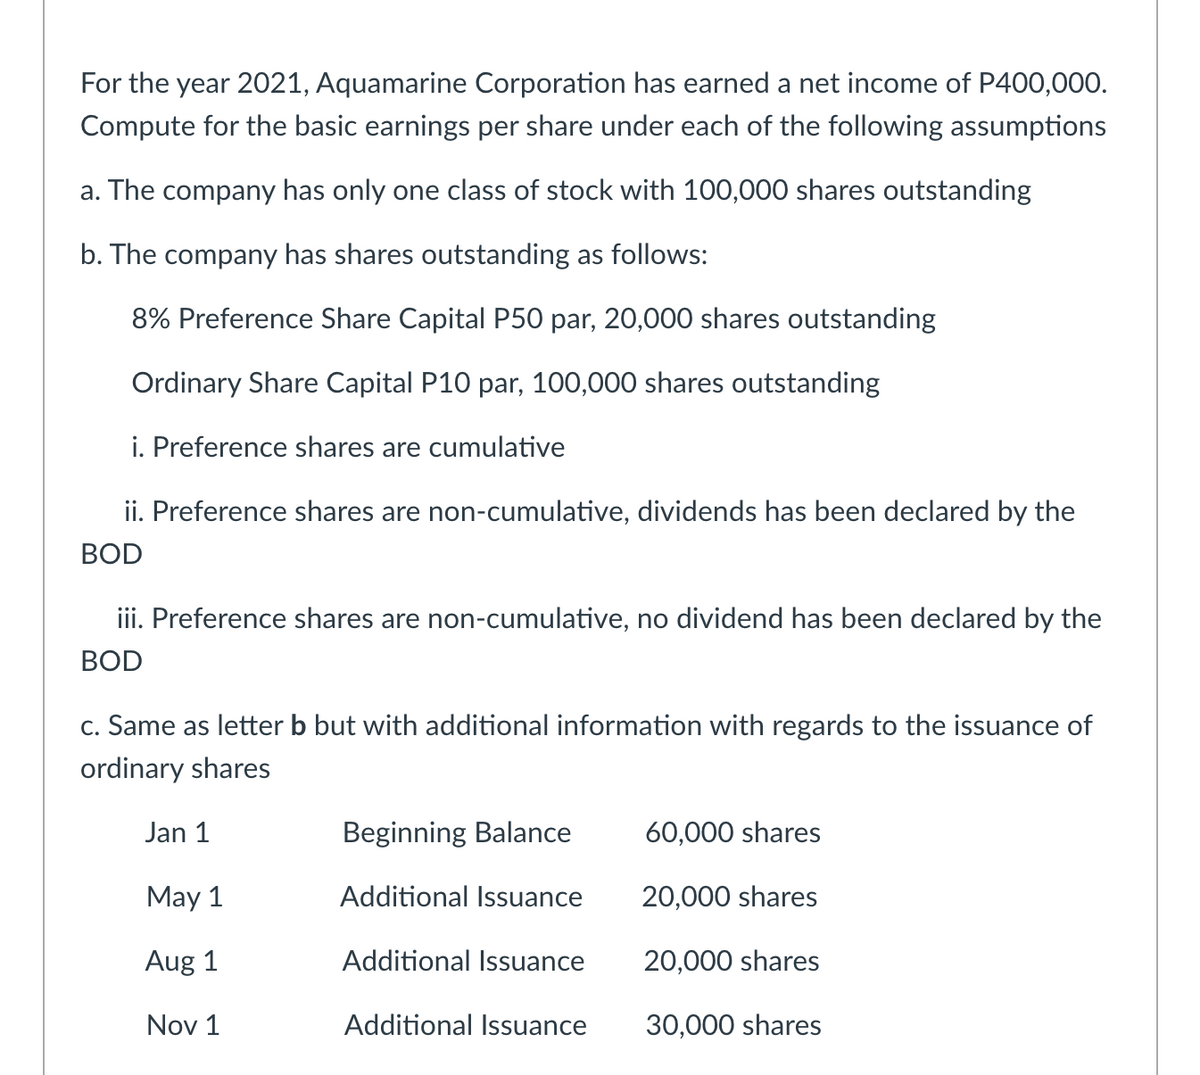 For the year 2021, Aquamarine Corporation has earned a net income of P400,000.
Compute for the basic earnings per share under each of the following assumptions
a. The company has only one class of stock with 100,000 shares outstanding
b. The company has shares outstanding as follows:
8% Preference Share Capital P50 par, 20,000 shares outstanding
Ordinary Share Capital P10 par, 100,000 shares outstanding
i. Preference shares are cumulative
ii. Preference shares are non-cumulative, dividends has been declared by the
BOD
iii. Preference shares are non-cumulative, no dividend has been declared by the
BOD
c. Same as letter b but with additional information with regards to the issuance of
ordinary shares
Jan 1
Beginning Balance
60,000 shares
May 1
Additional Isuance
20,000 shares
Aug 1
Additional Isuance
20,000 shares
Nov 1
Additional Isuance
30,000 shares
